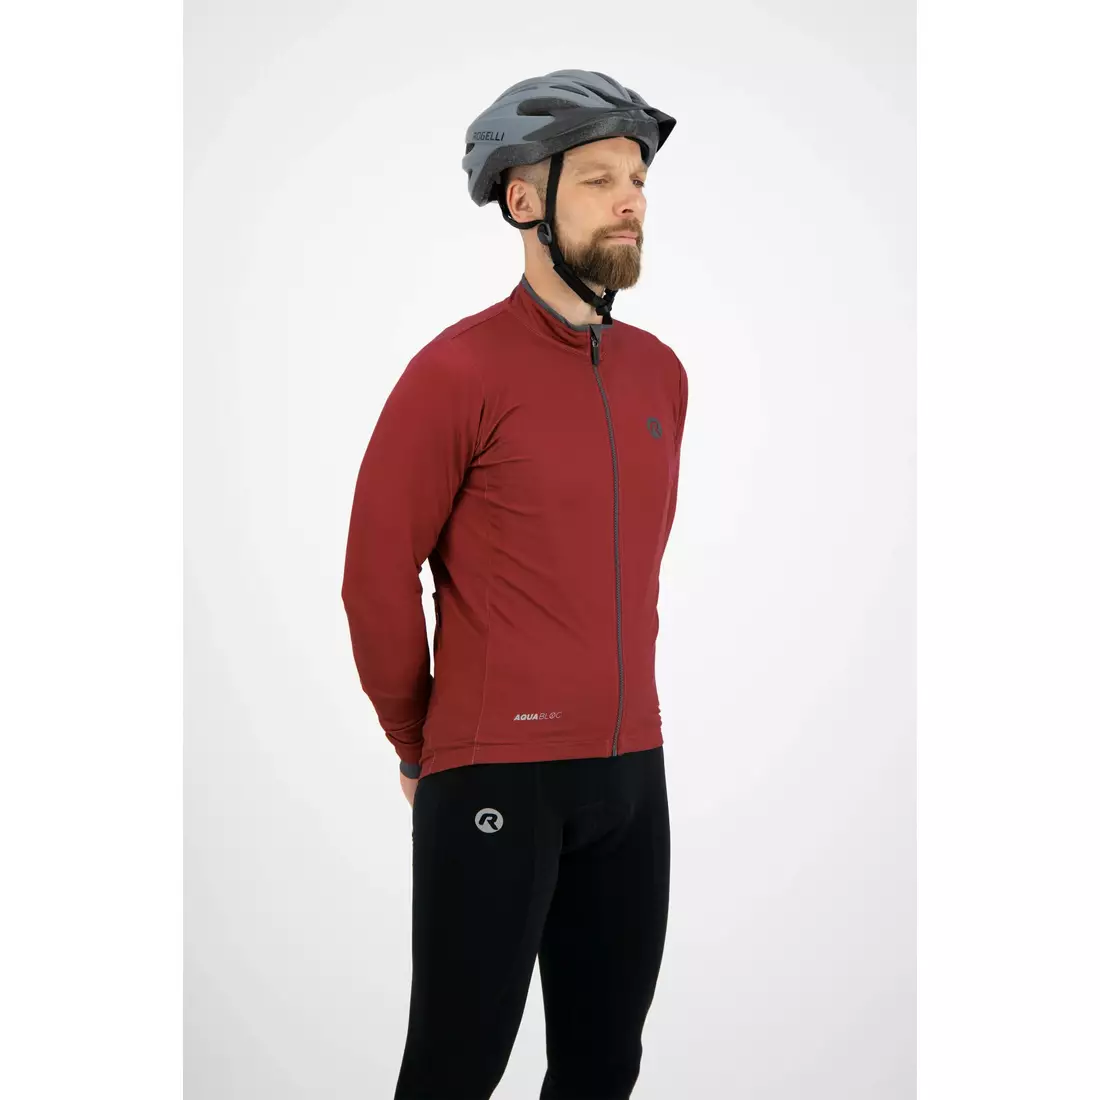 ROGELLI ESSENTIAL men's insulated bicycle jacket impregnated, bricklayer